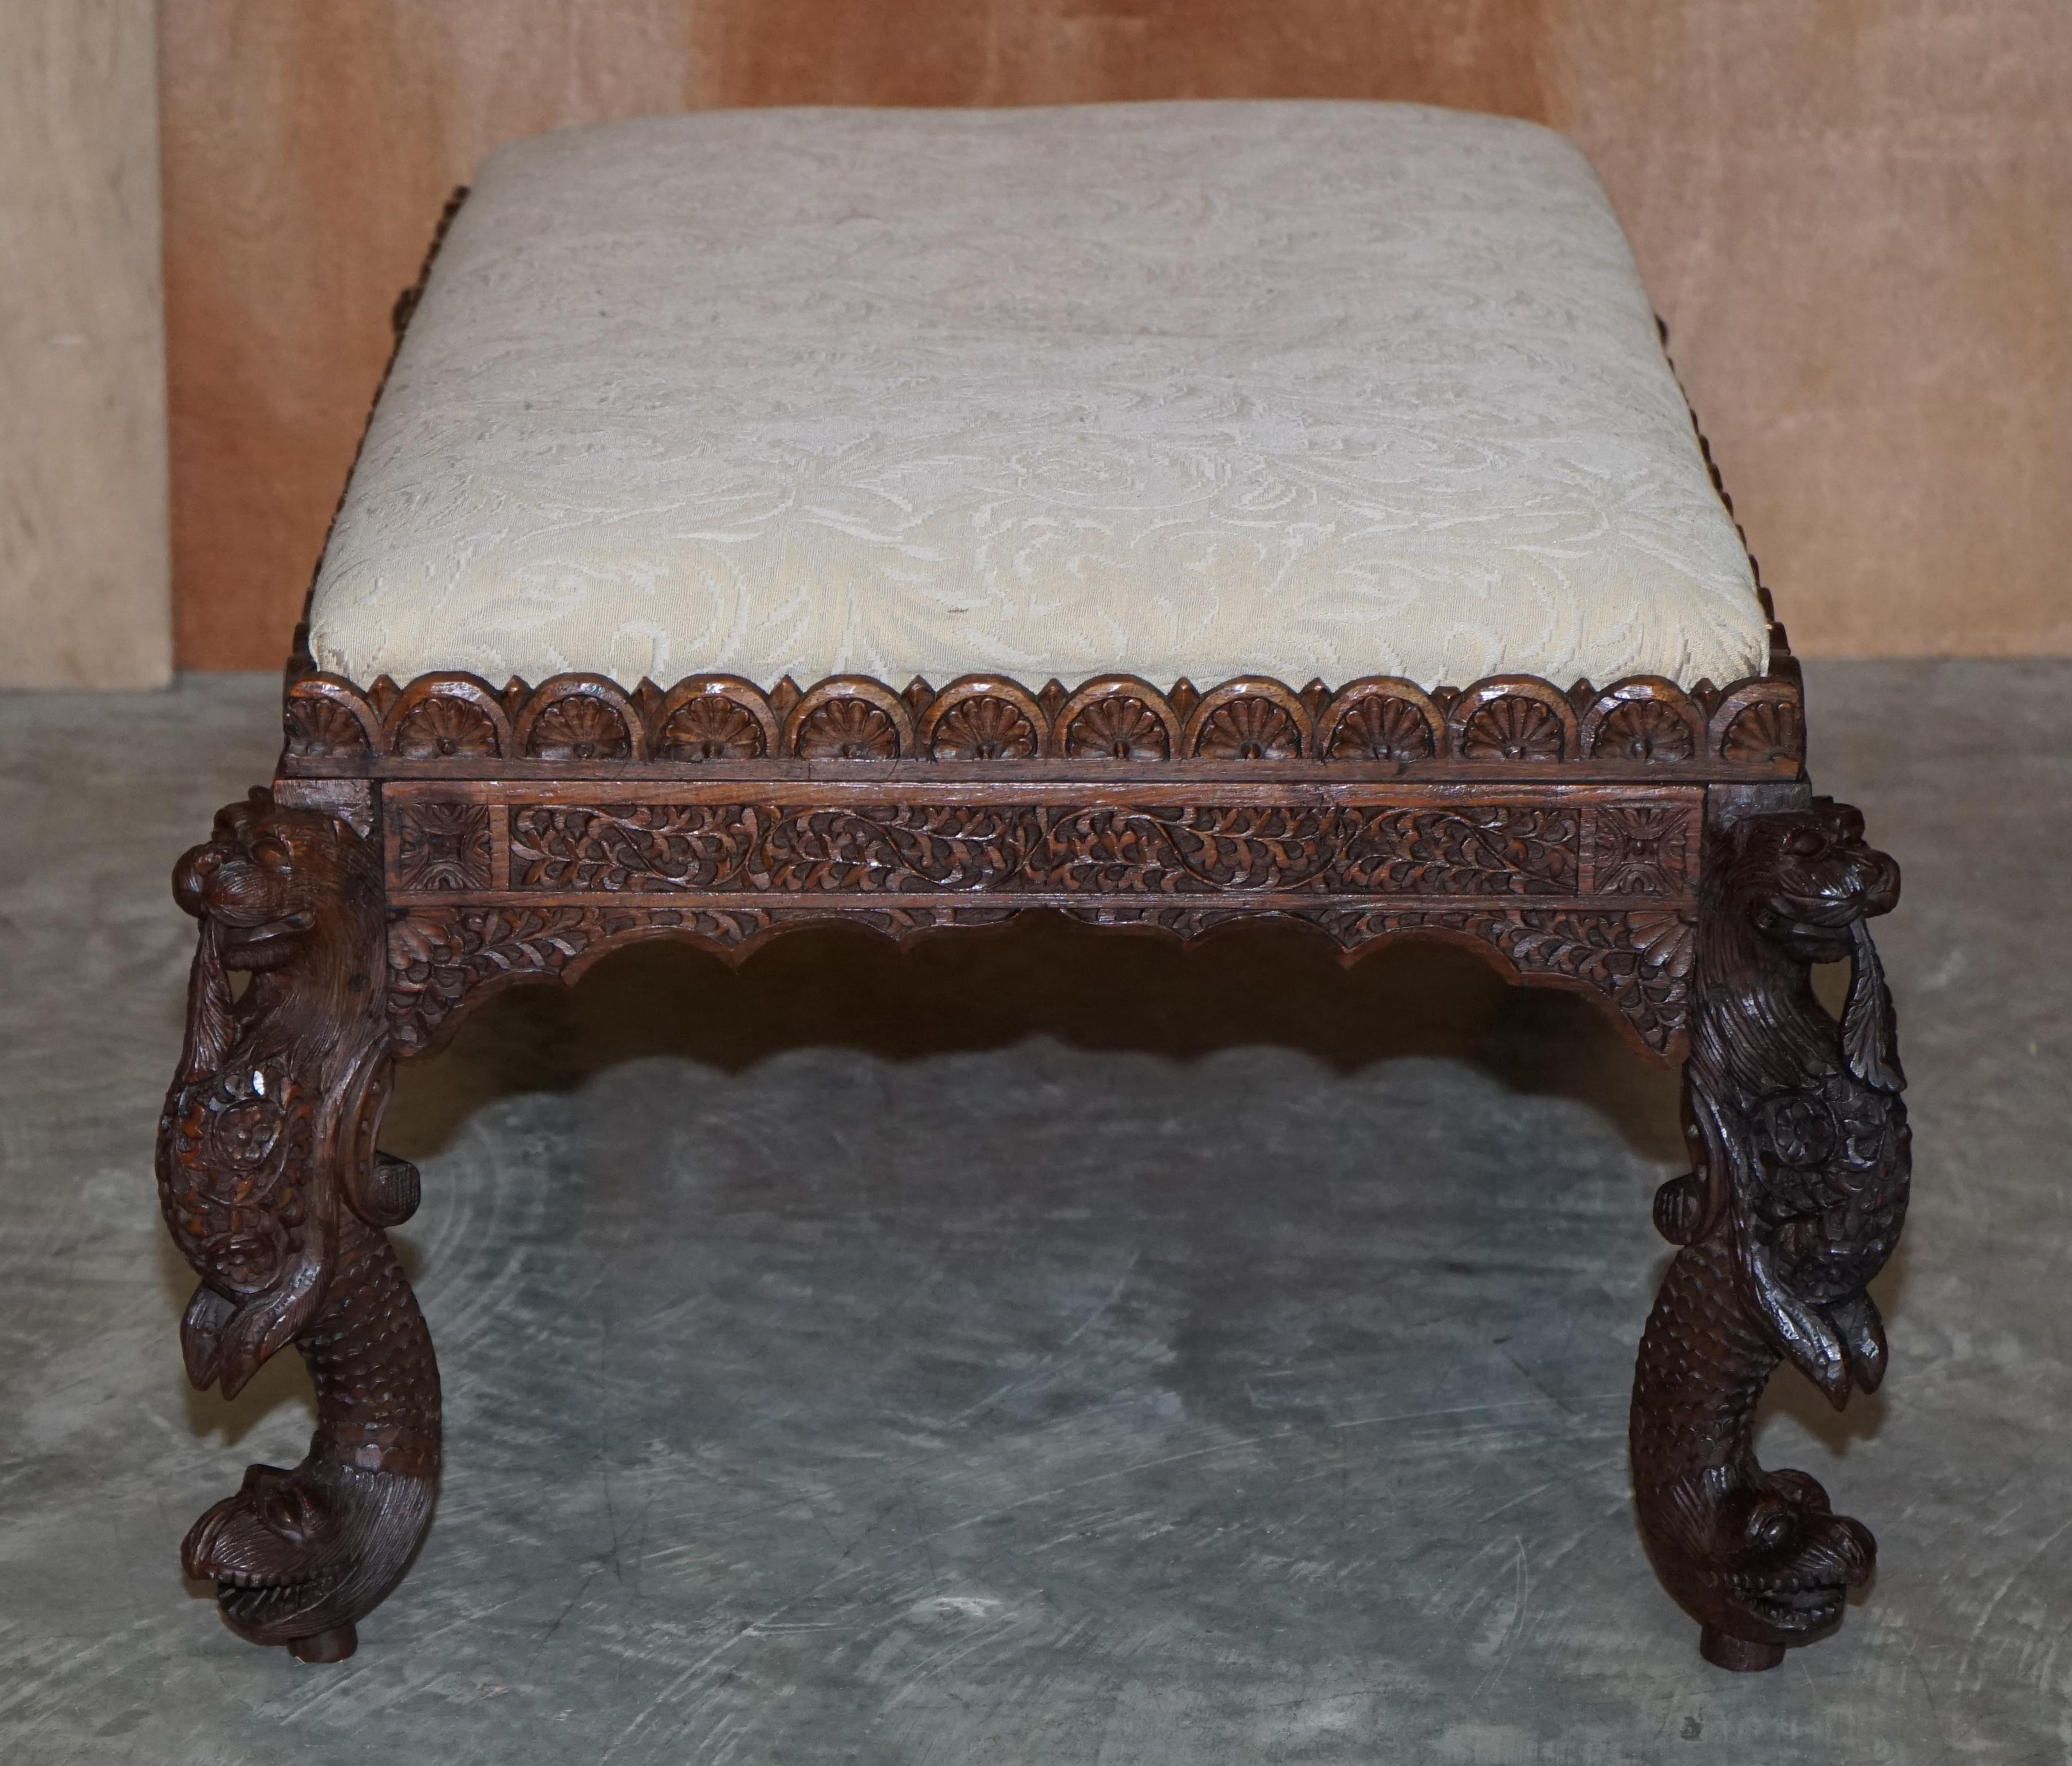 Upholstery Fine circa 1880 Antique Victorian Anglo Indian Burmese Carved Footstool Ottoman For Sale